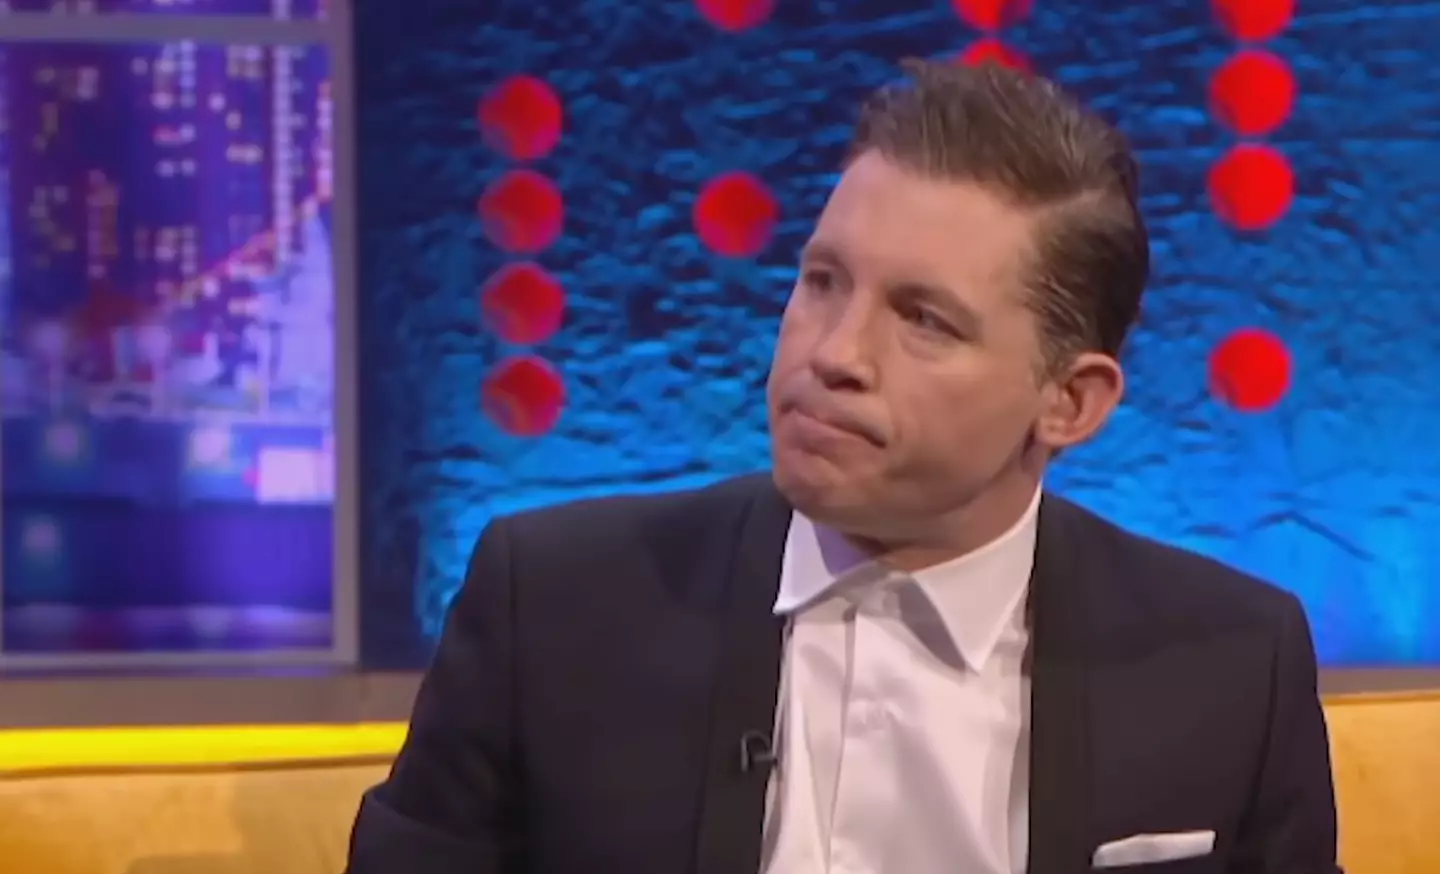 Lee Evans announced his retirement on The Jonathan Ross Show.